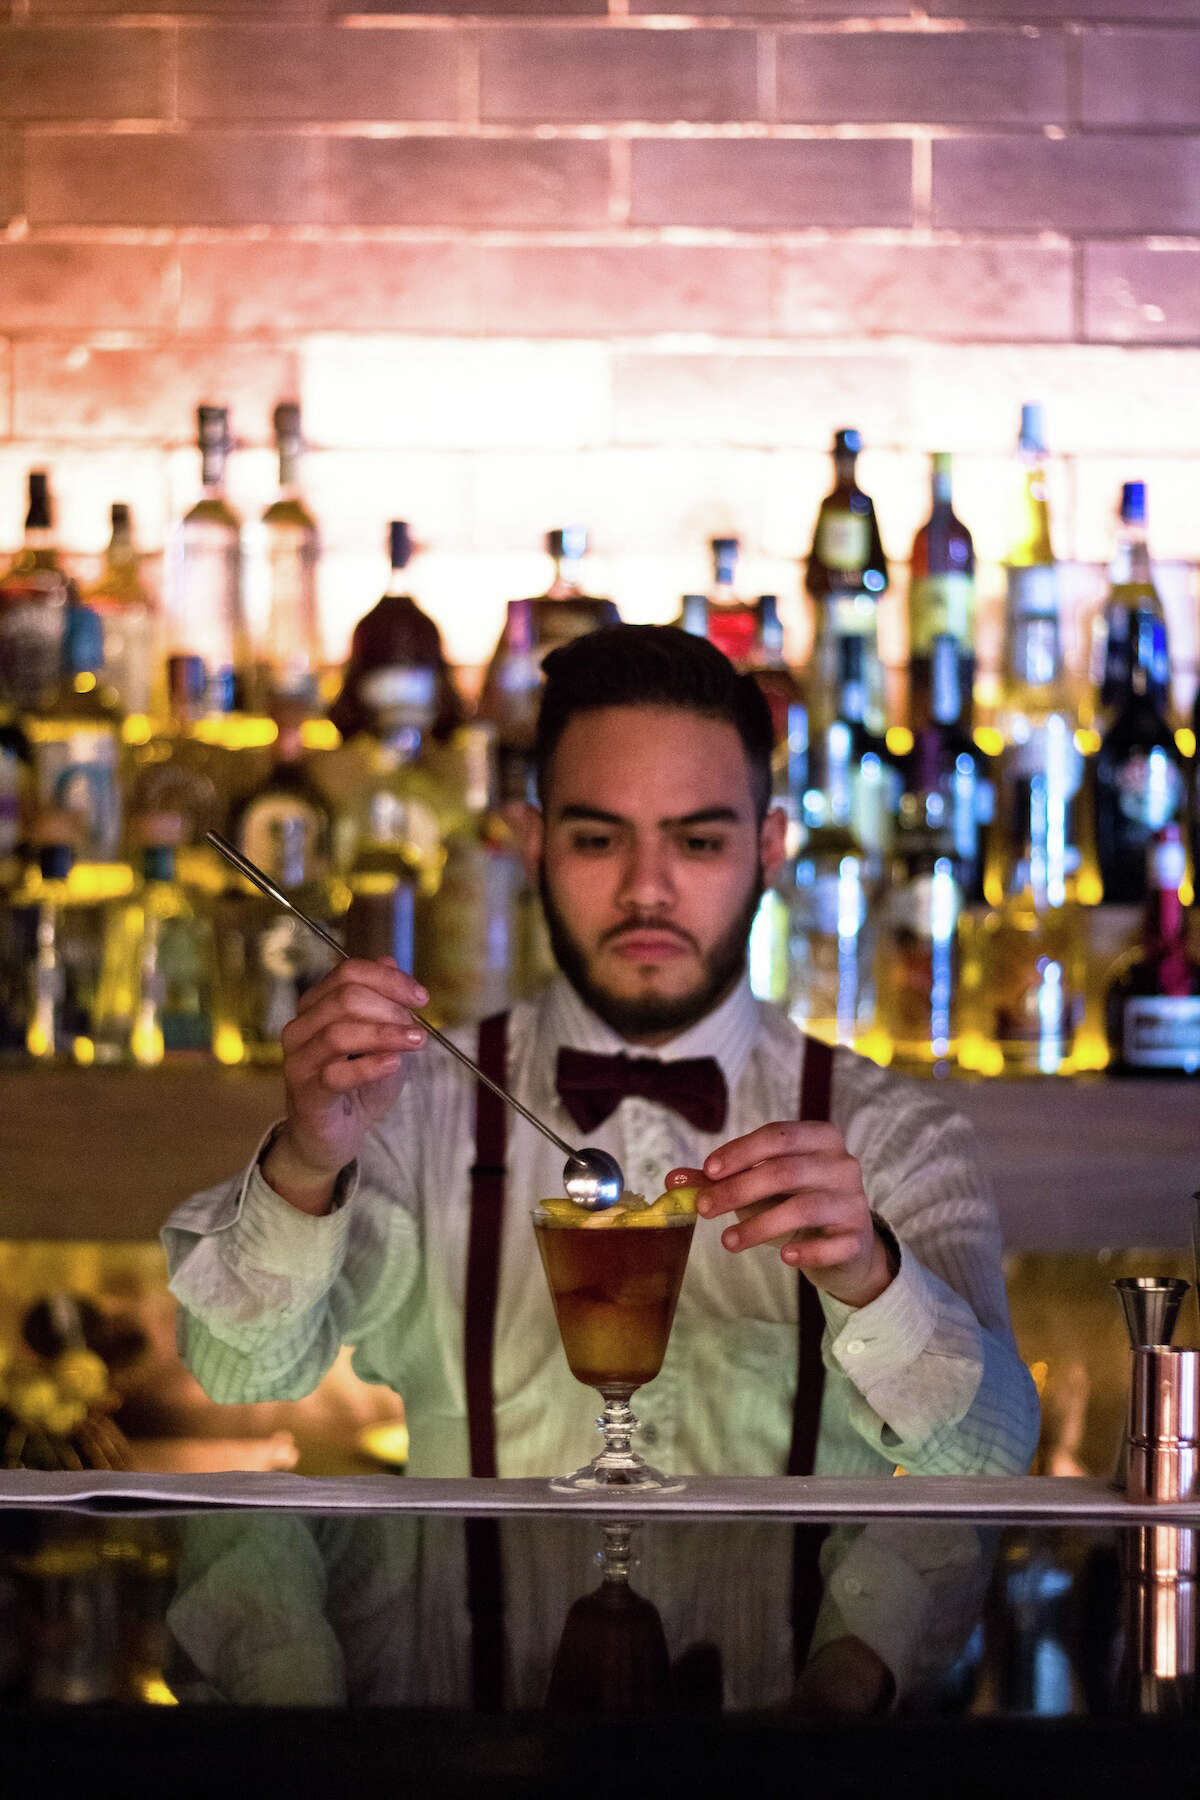 The bar scene is the new tourist attraction ﻿in Mexico City's Colonia Juarez neighborhood.﻿